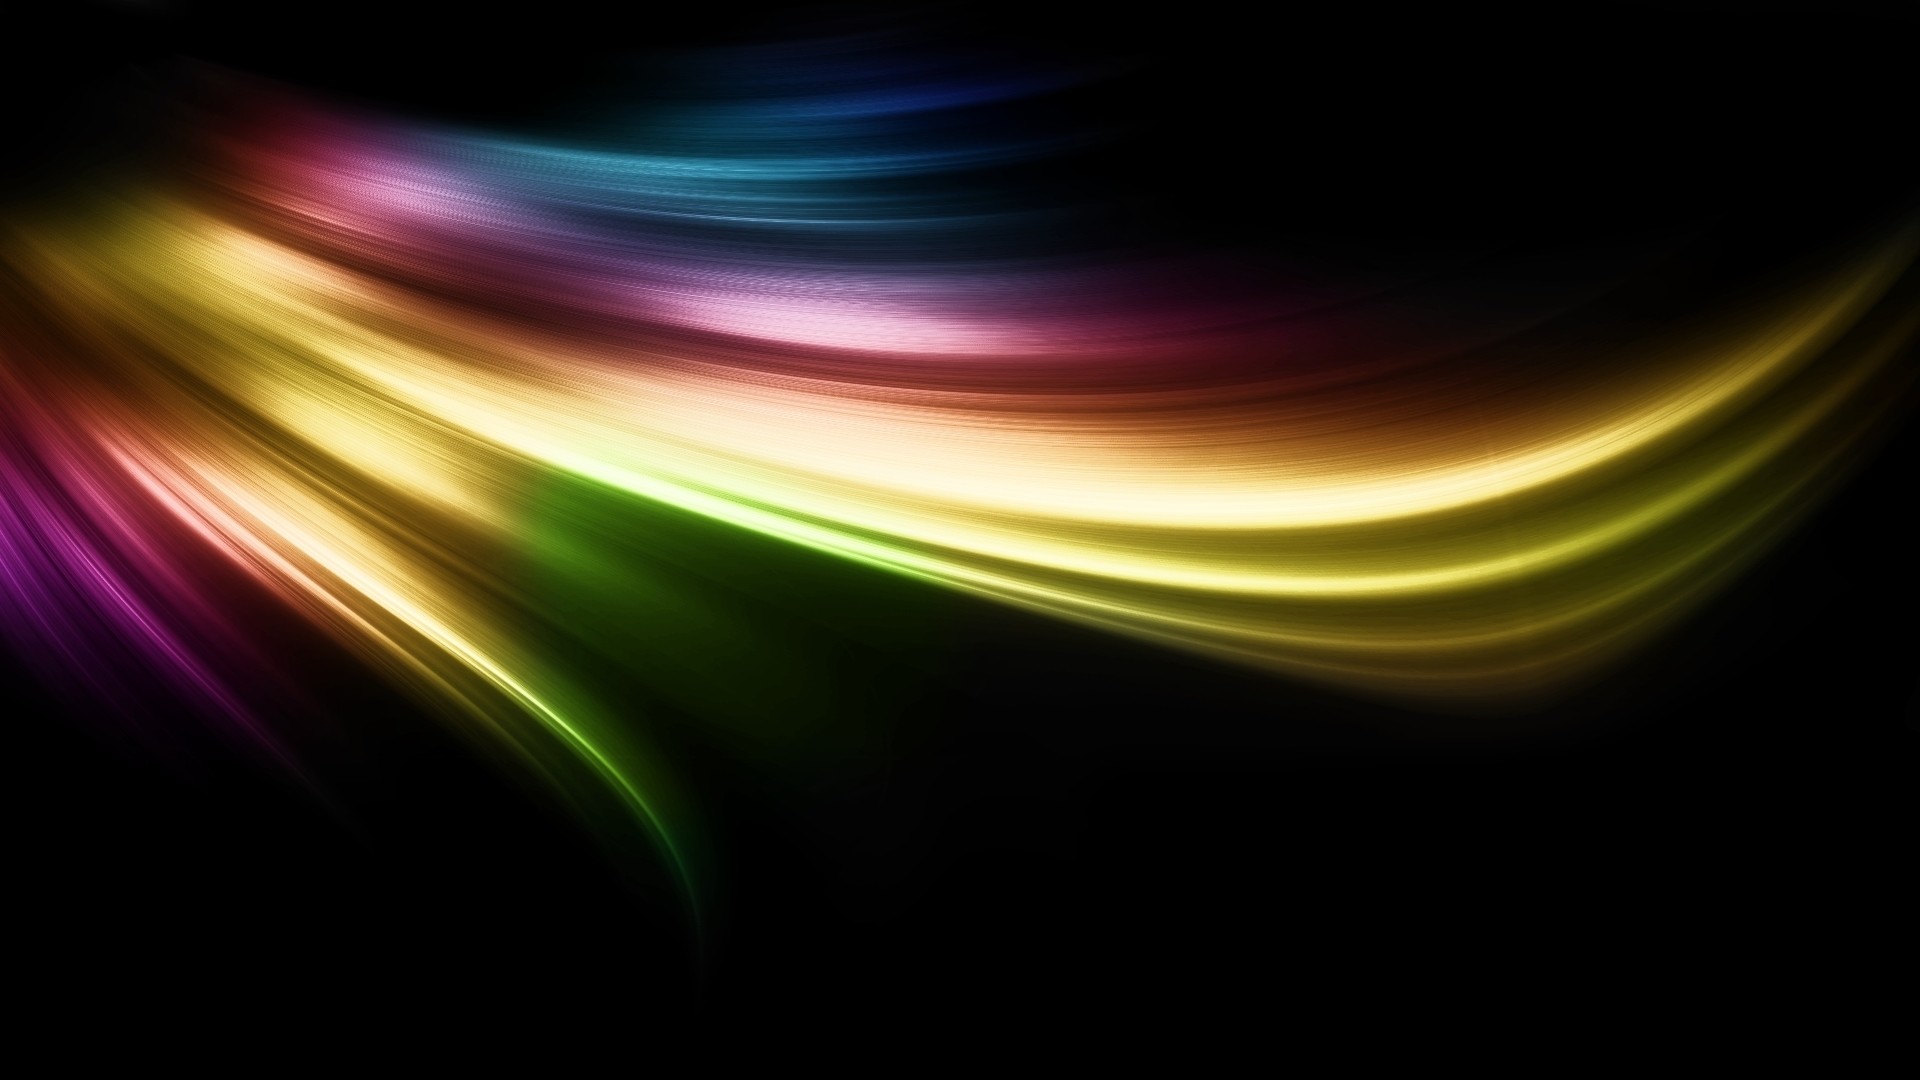 Rainbow Colorful Abstract | https://bestwallpaperhd.com/rainbow-colorful-